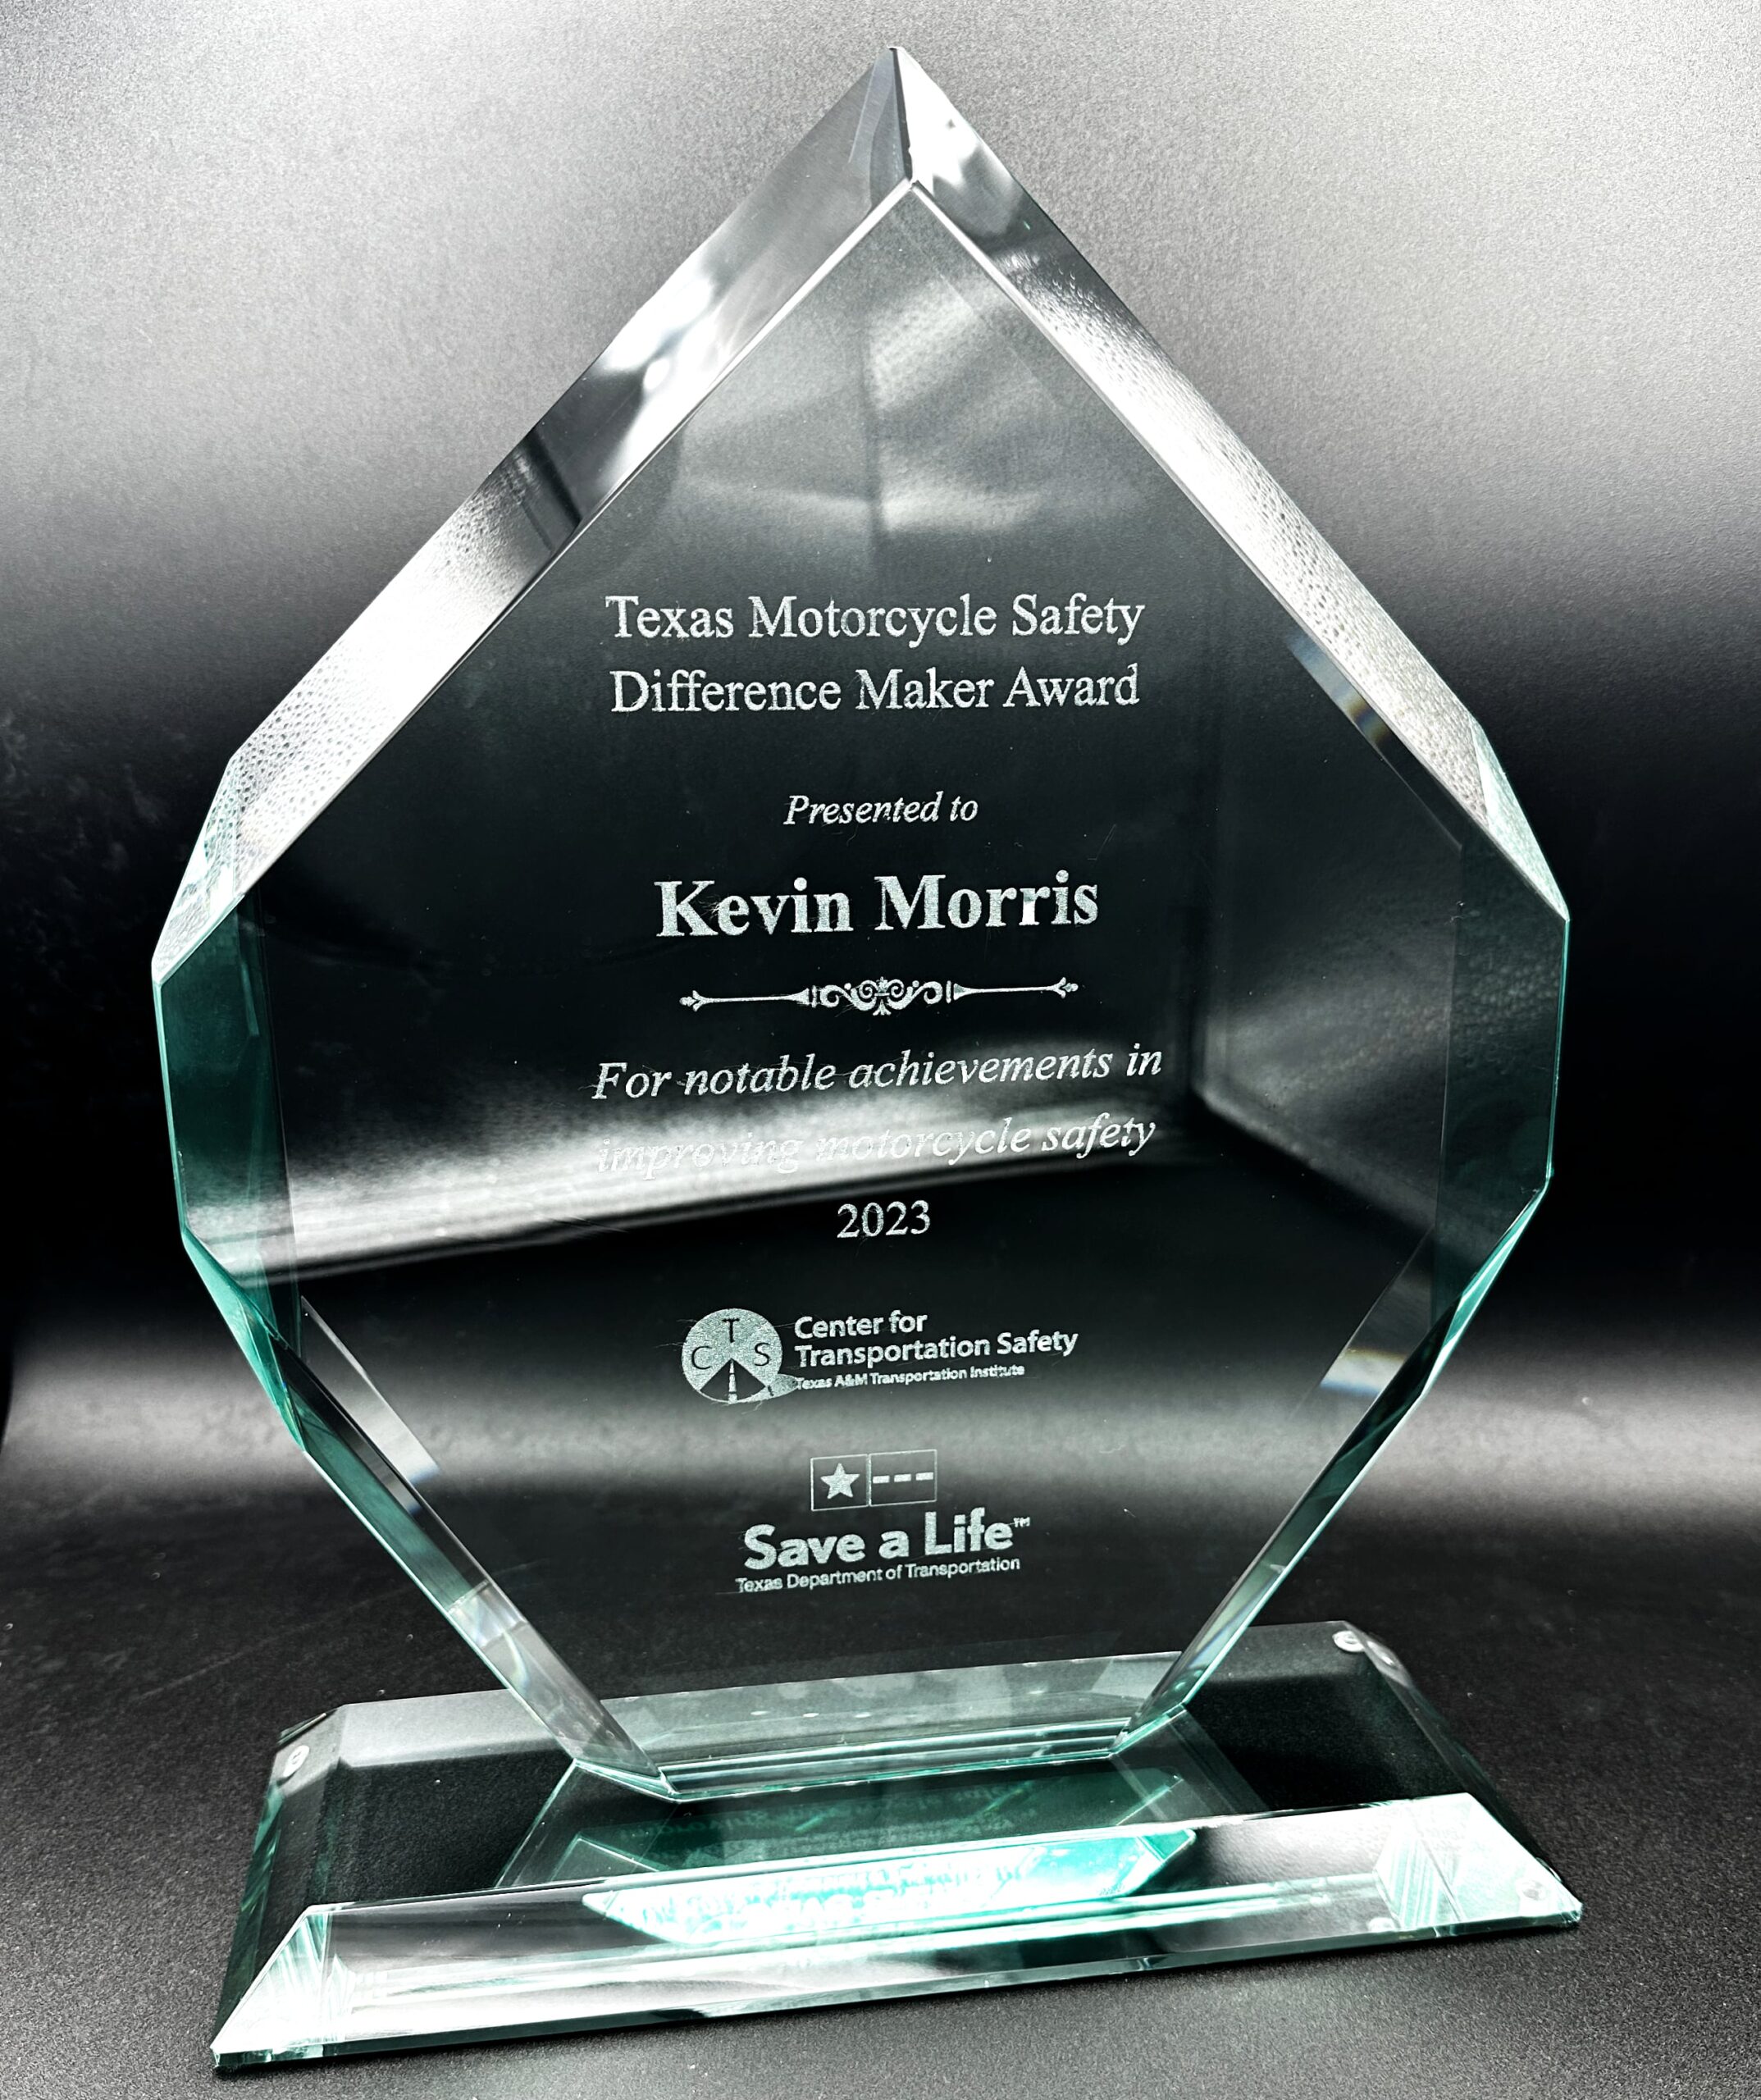 The Texas Motorcycle Safety Difference Maker Award